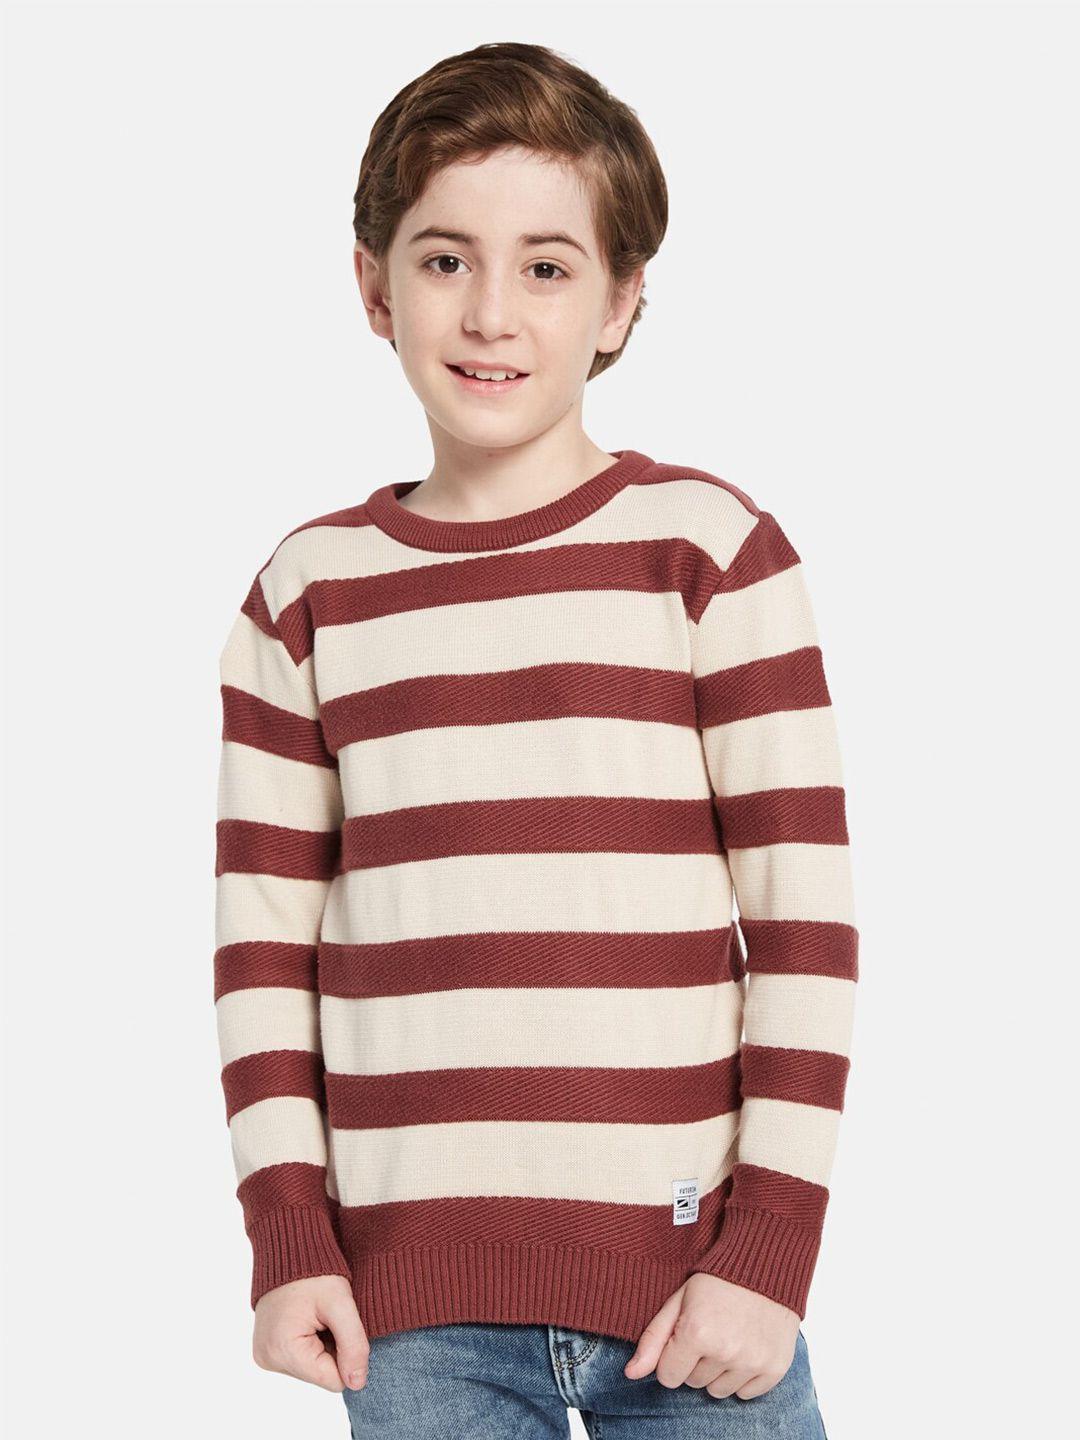 octave boys striped round neck cotton pullover sweater